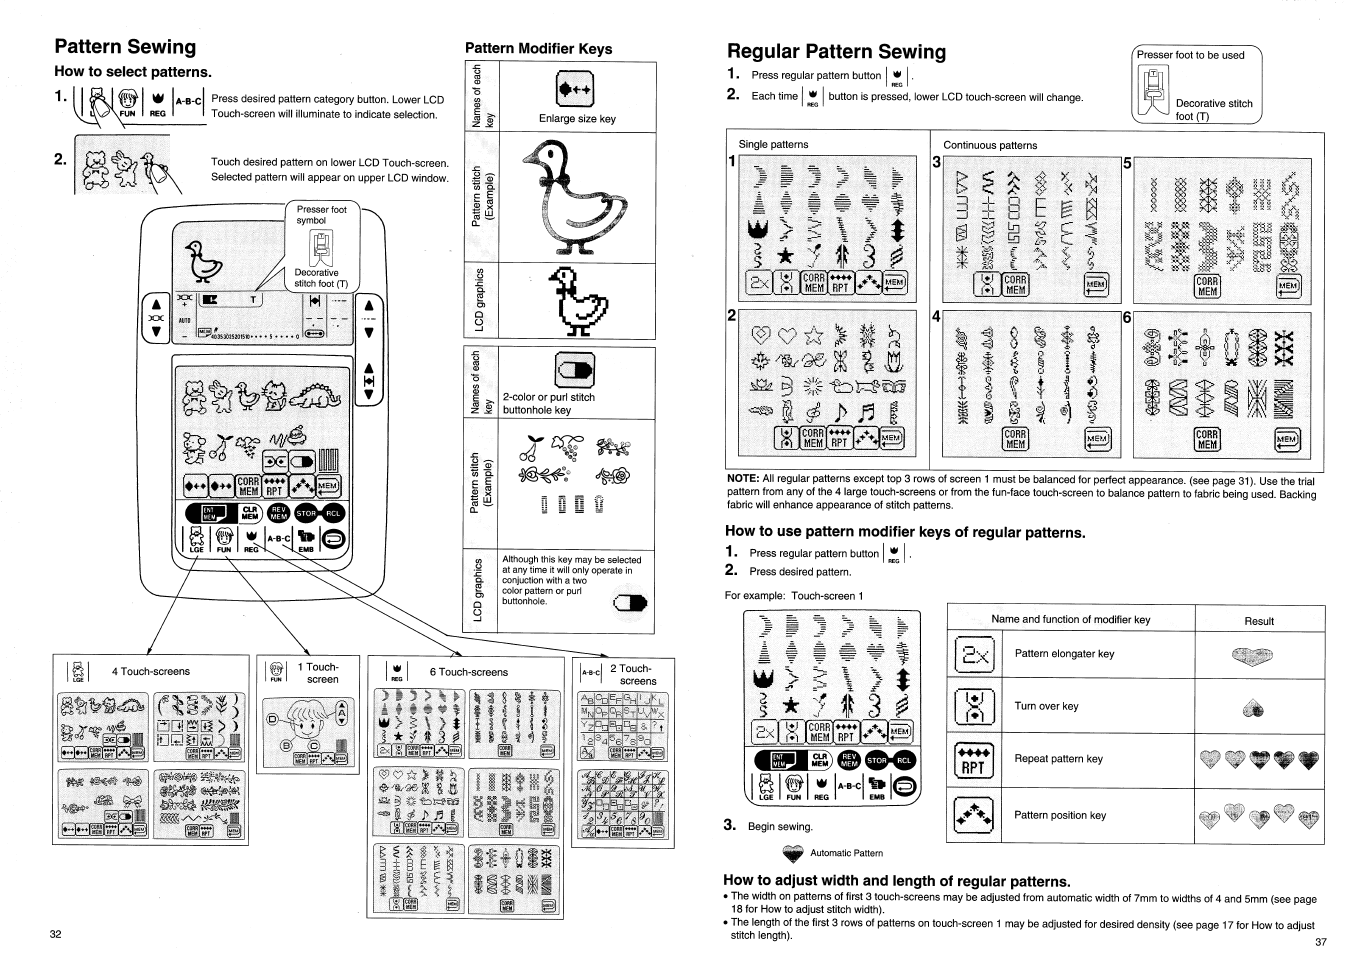 Pattern sewing, How to select patterns, Pattern modifier keys | Pattern sewing ,33 | SINGER XL100 Quantum User Manual | Page 34 / 72